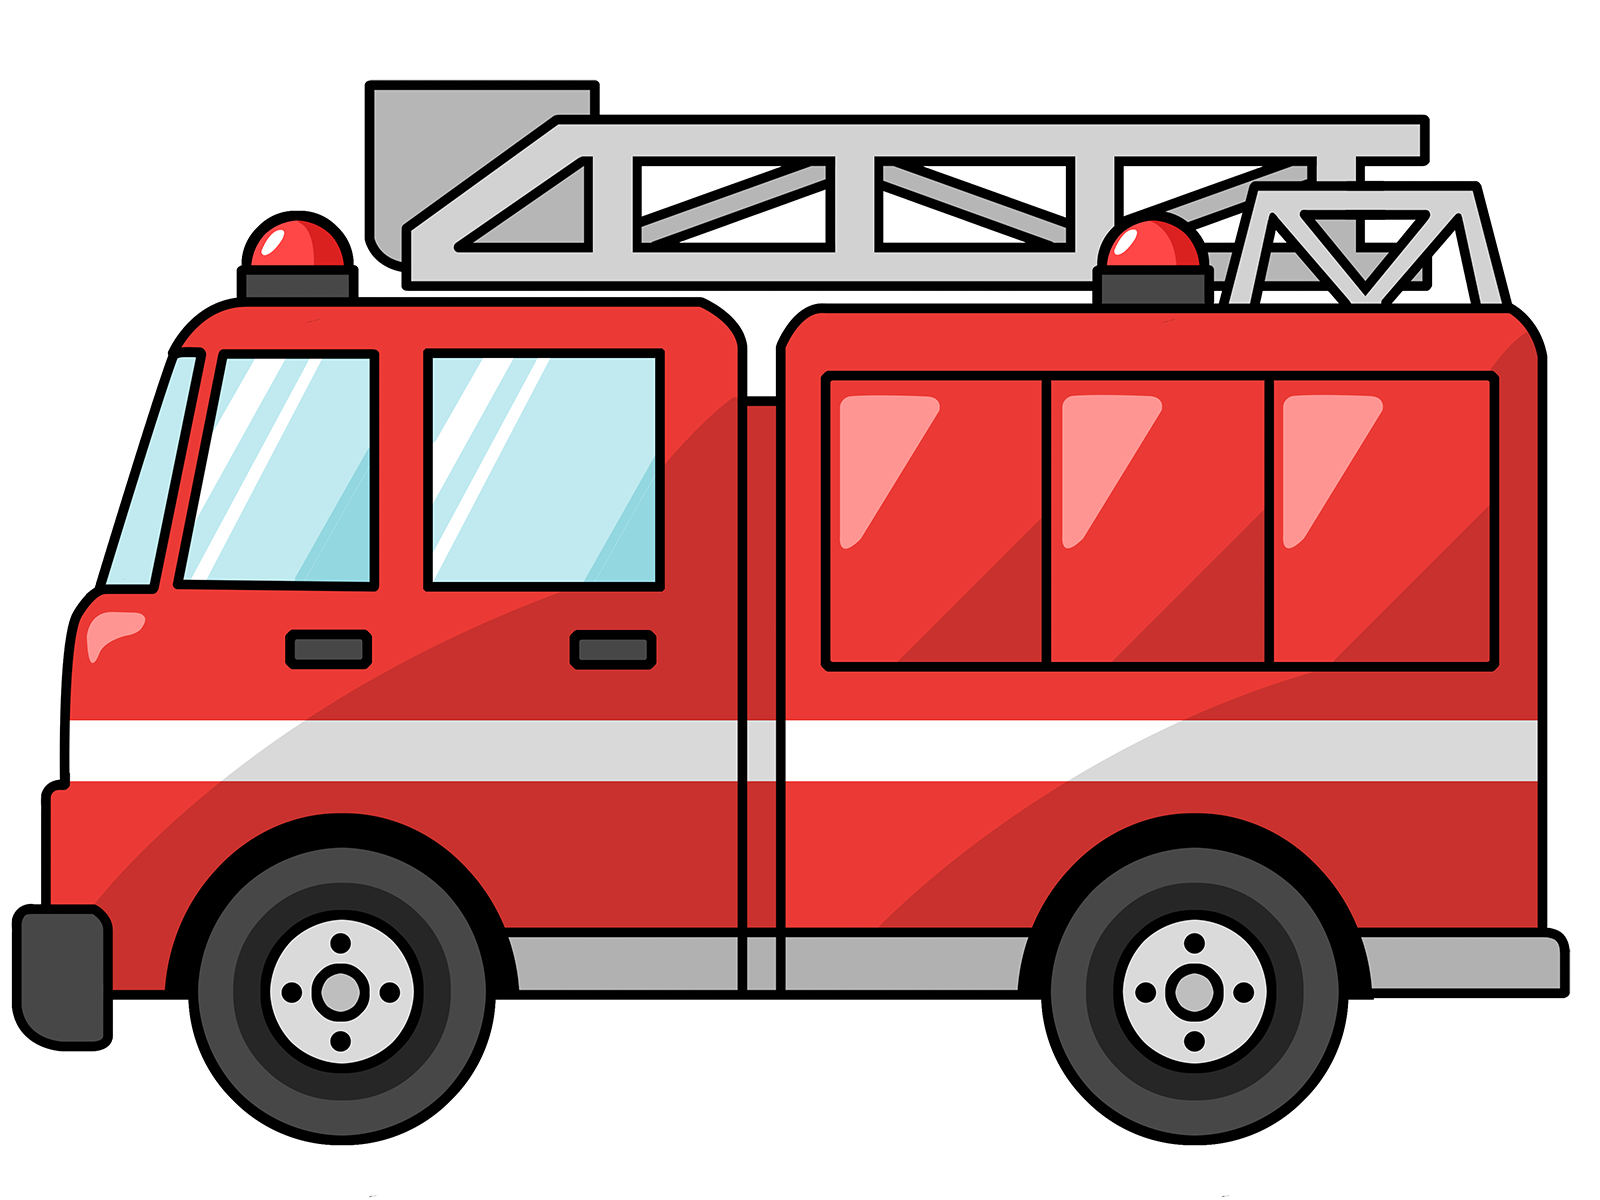 Fire Station Clip Art - Clipart library